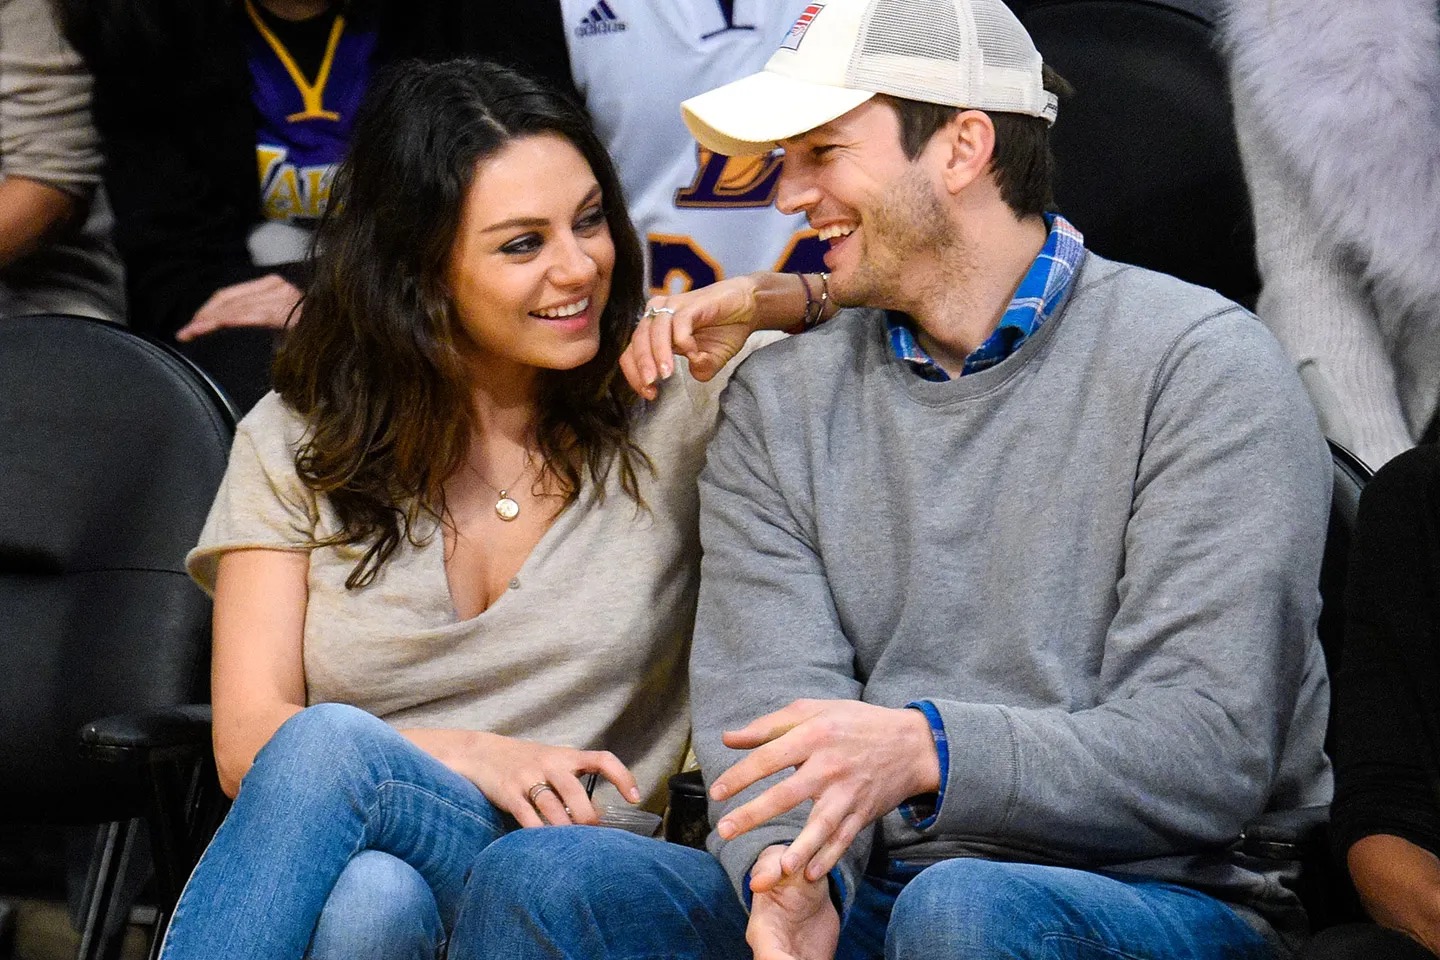 You got: Ashton Kutcher and Mila Kunis! Choose Your Flavor Combos and We’ll Reveal Which Celebrity Couple 🌟 You and Your Partner Are Most Like